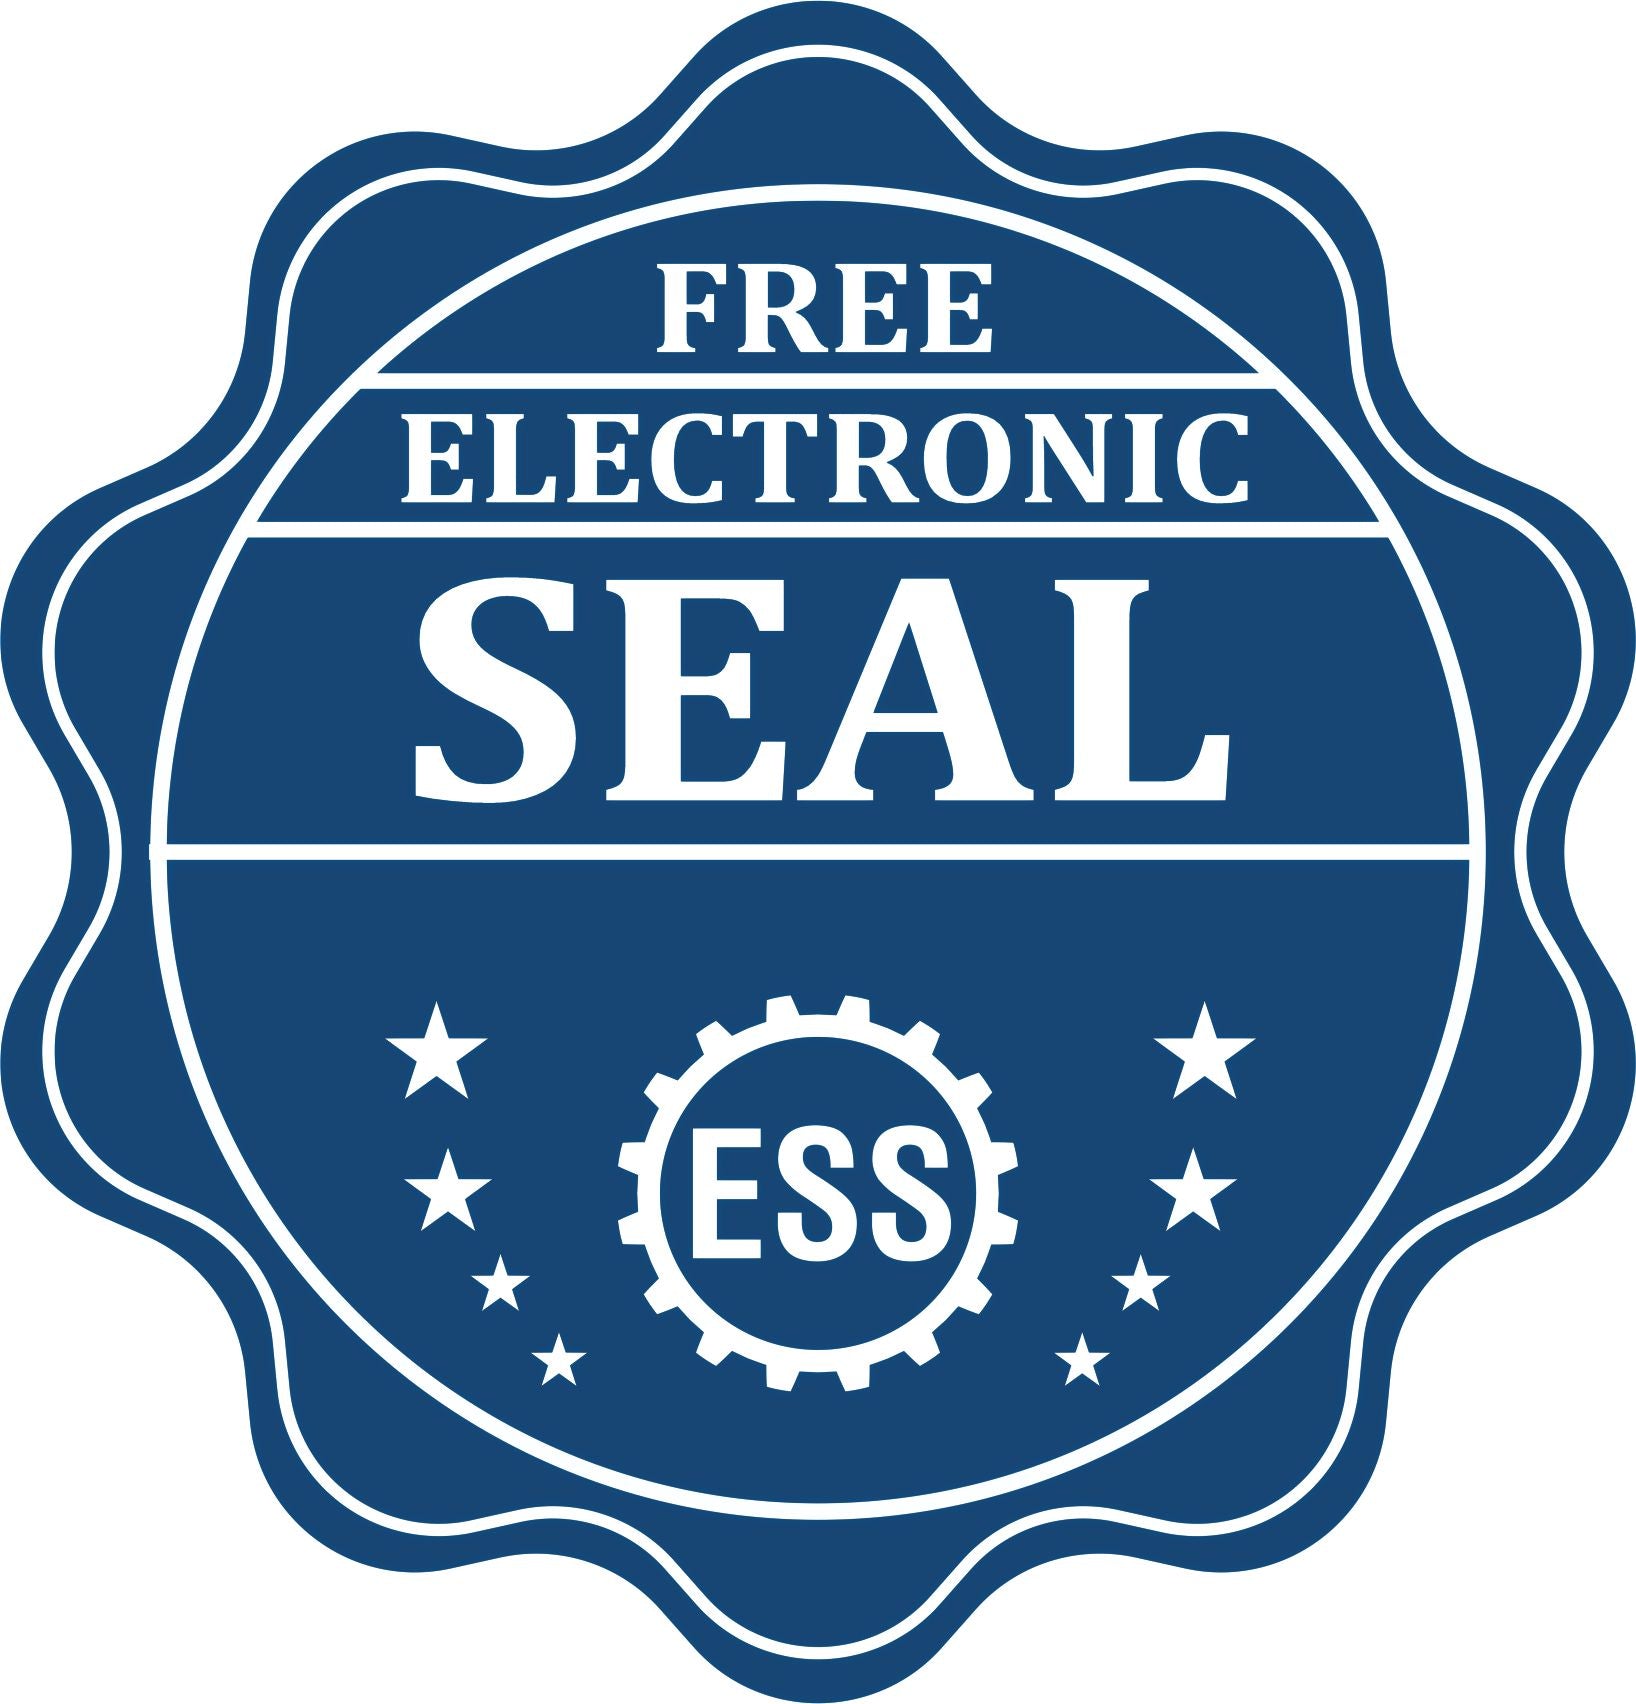 A badge showing a free electronic seal for the Heavy Duty Cast Iron Delaware Land Surveyor Seal Embosser with stars and the ESS gear on the emblem.